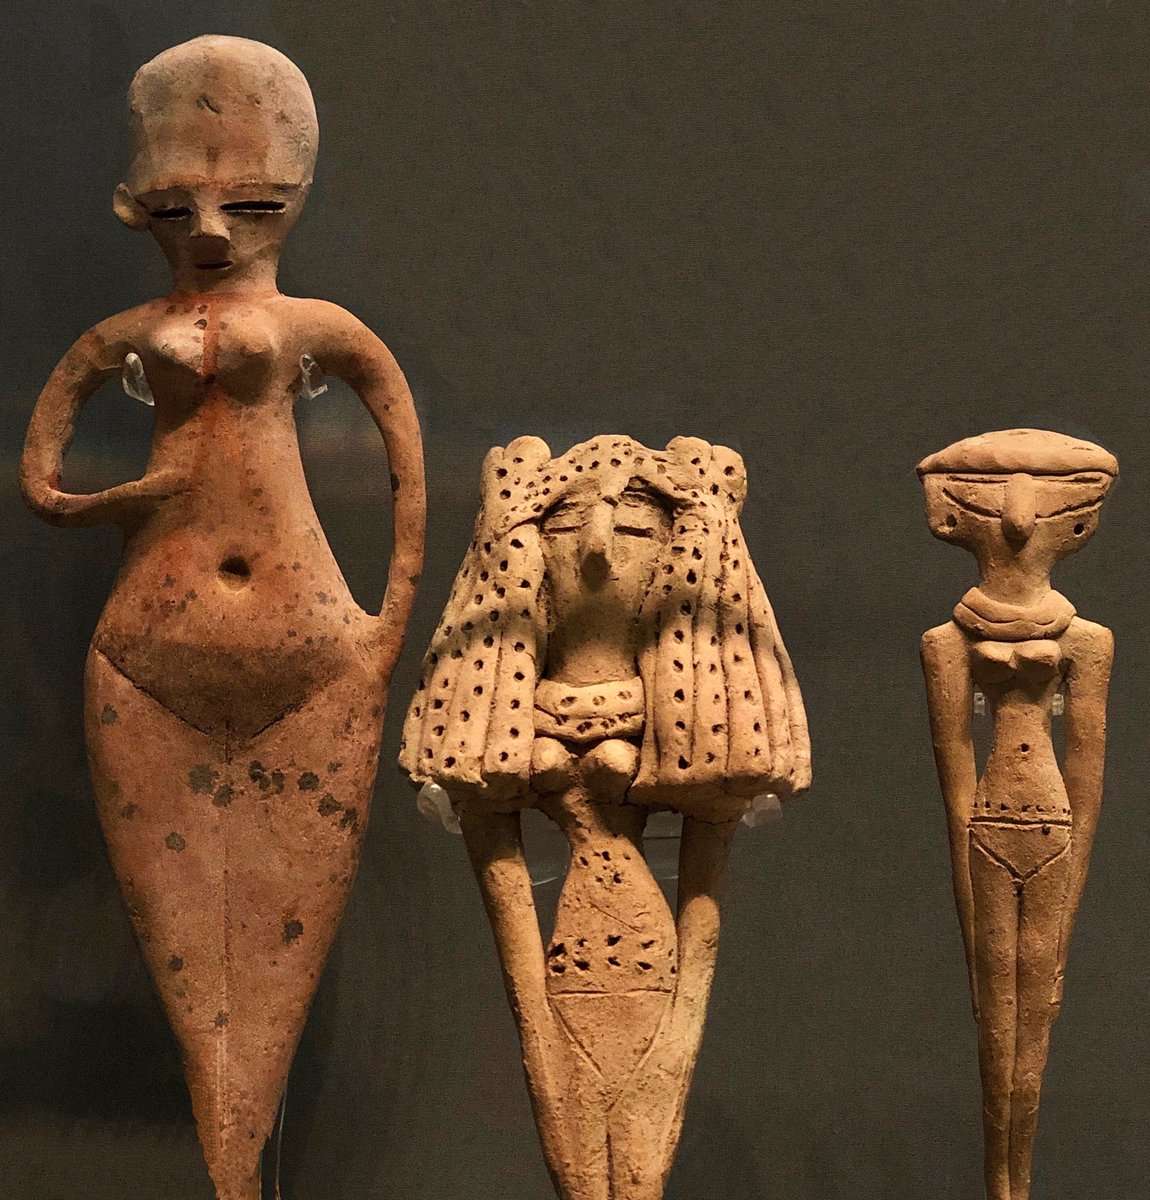 “Please welcome to the stage... The Fertility Figures!”

1550-1070 BC, Egypt #FirstGirlBand #FitzwilliamMuseum